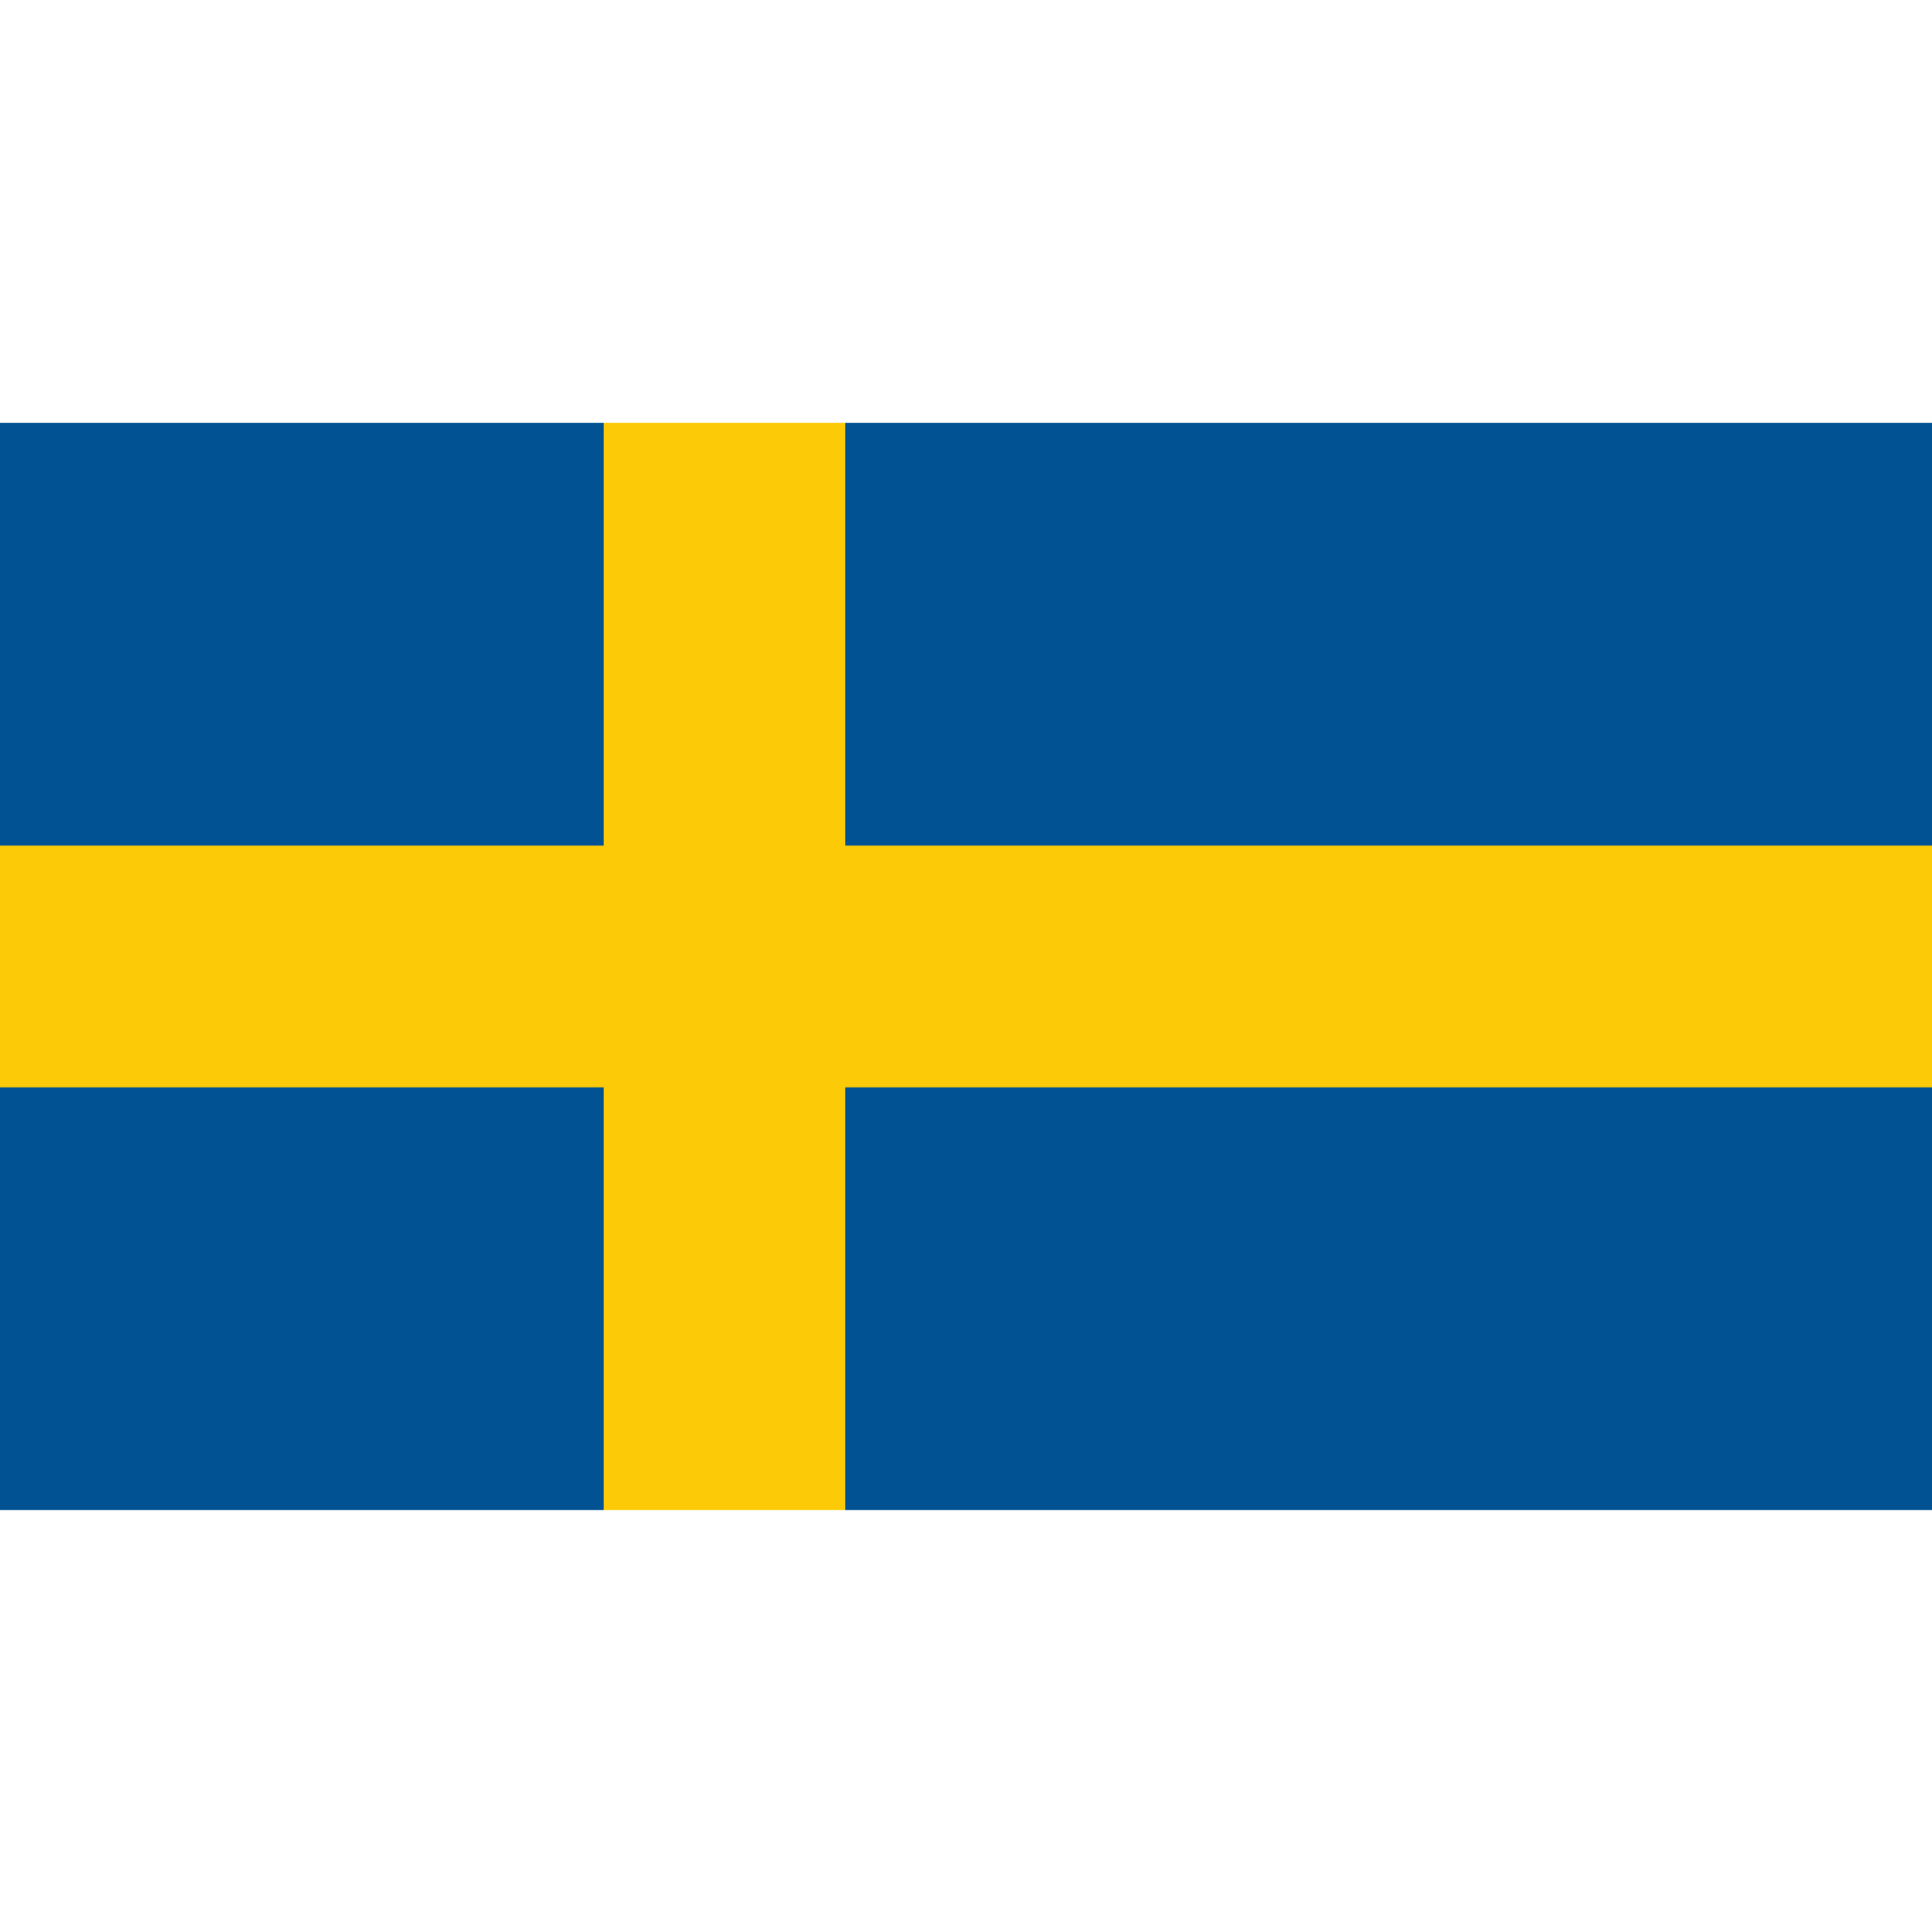 The flag of Sweden has a light blue background with a yellow or gold Nordic cross slightly off centre to the left.